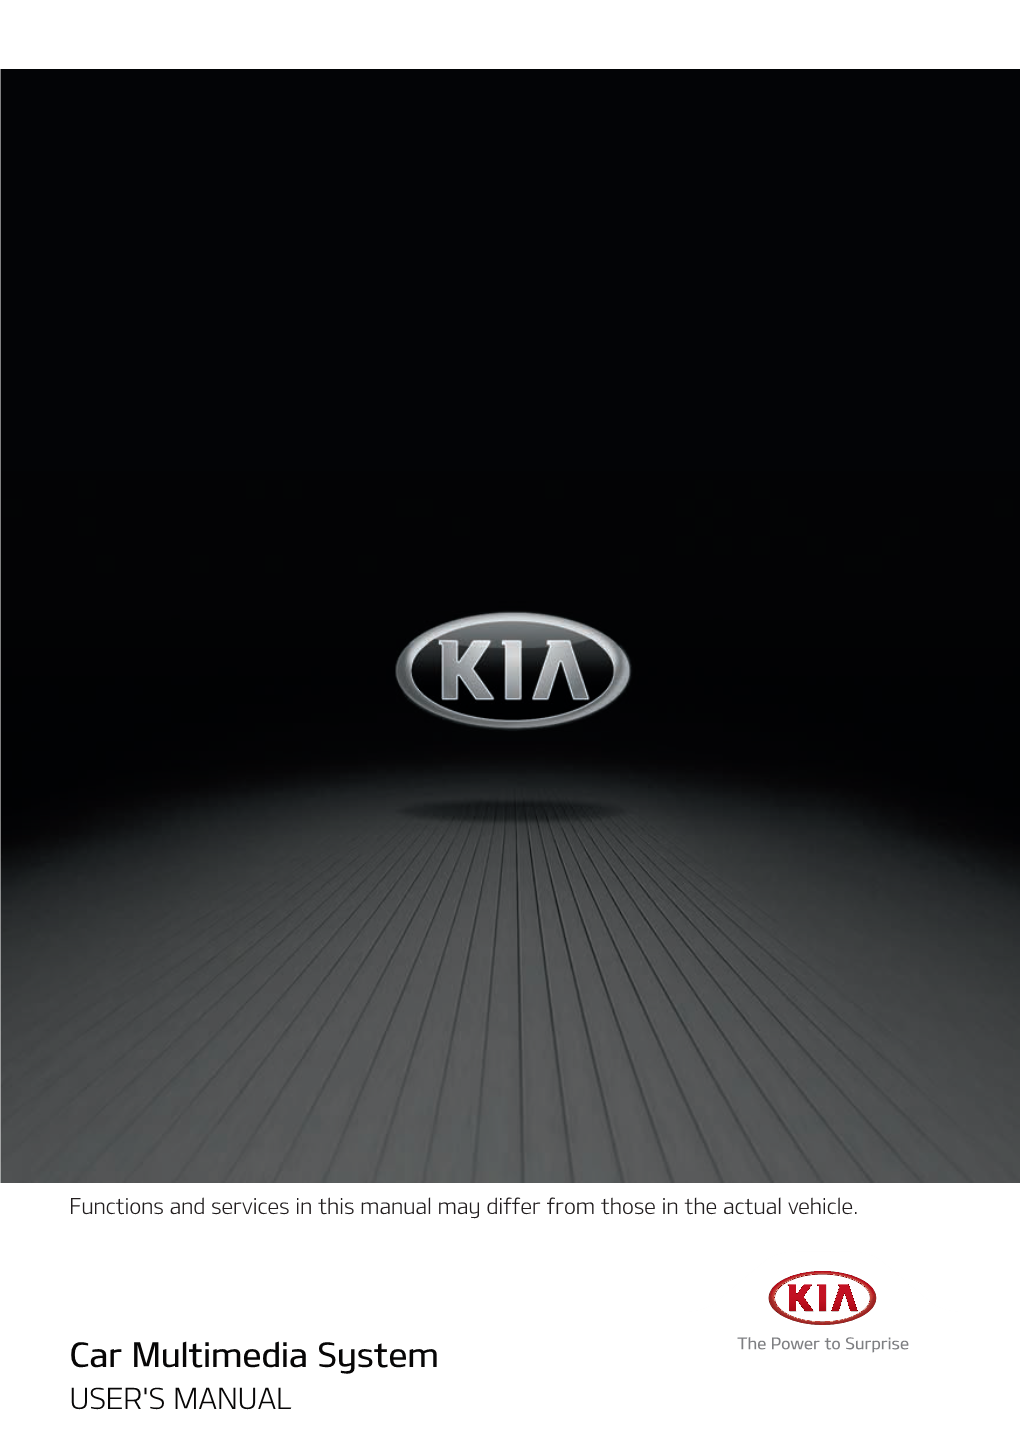 Car Multimedia System USER's MANUAL Thank You for Purchasing This KIA Motors Car Multimedia System